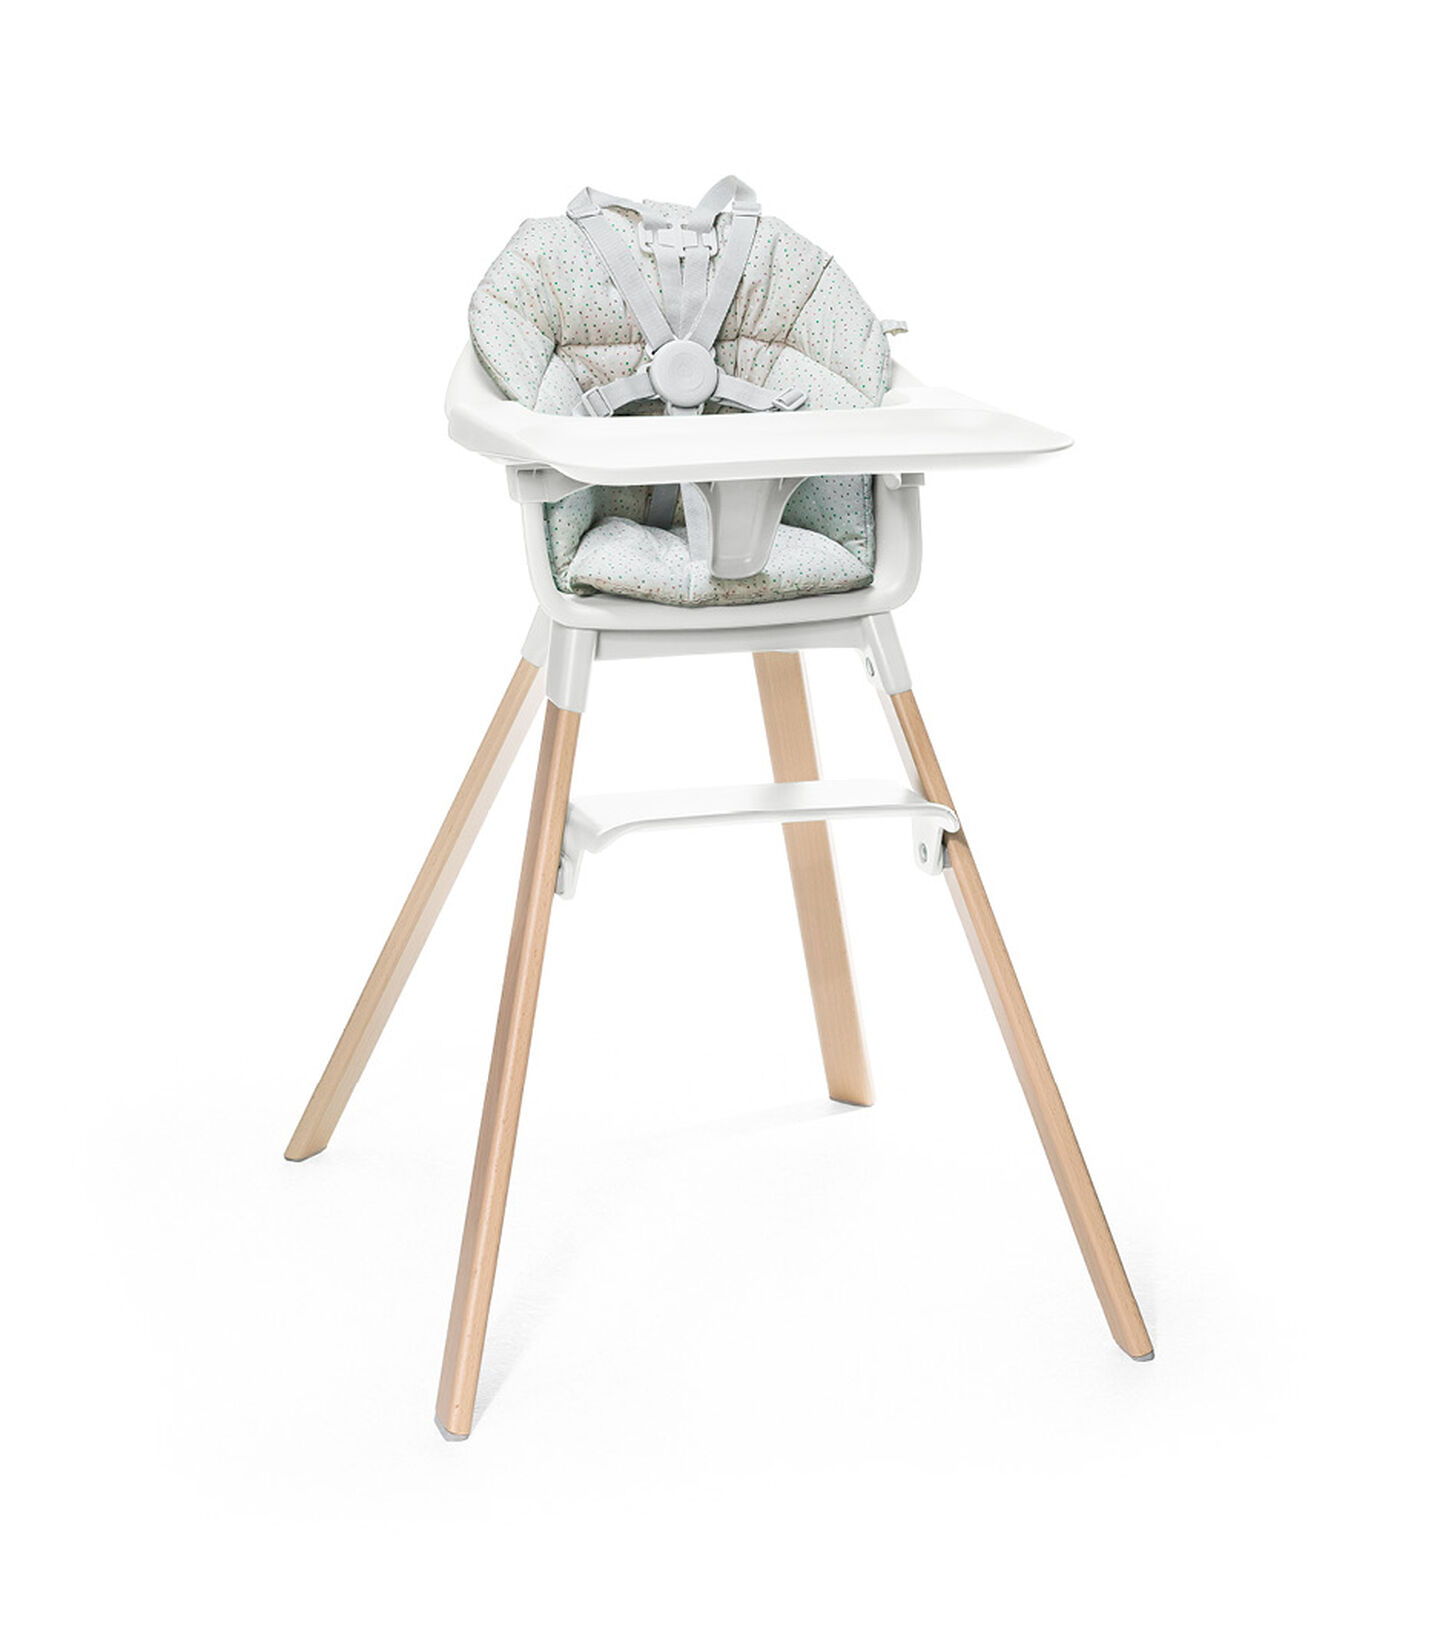 Stokke® Clikk™ High Chair. Natural Beech wood and White plastic parts including Tray. Cushion Grey Sprinkle and Harness. view 5